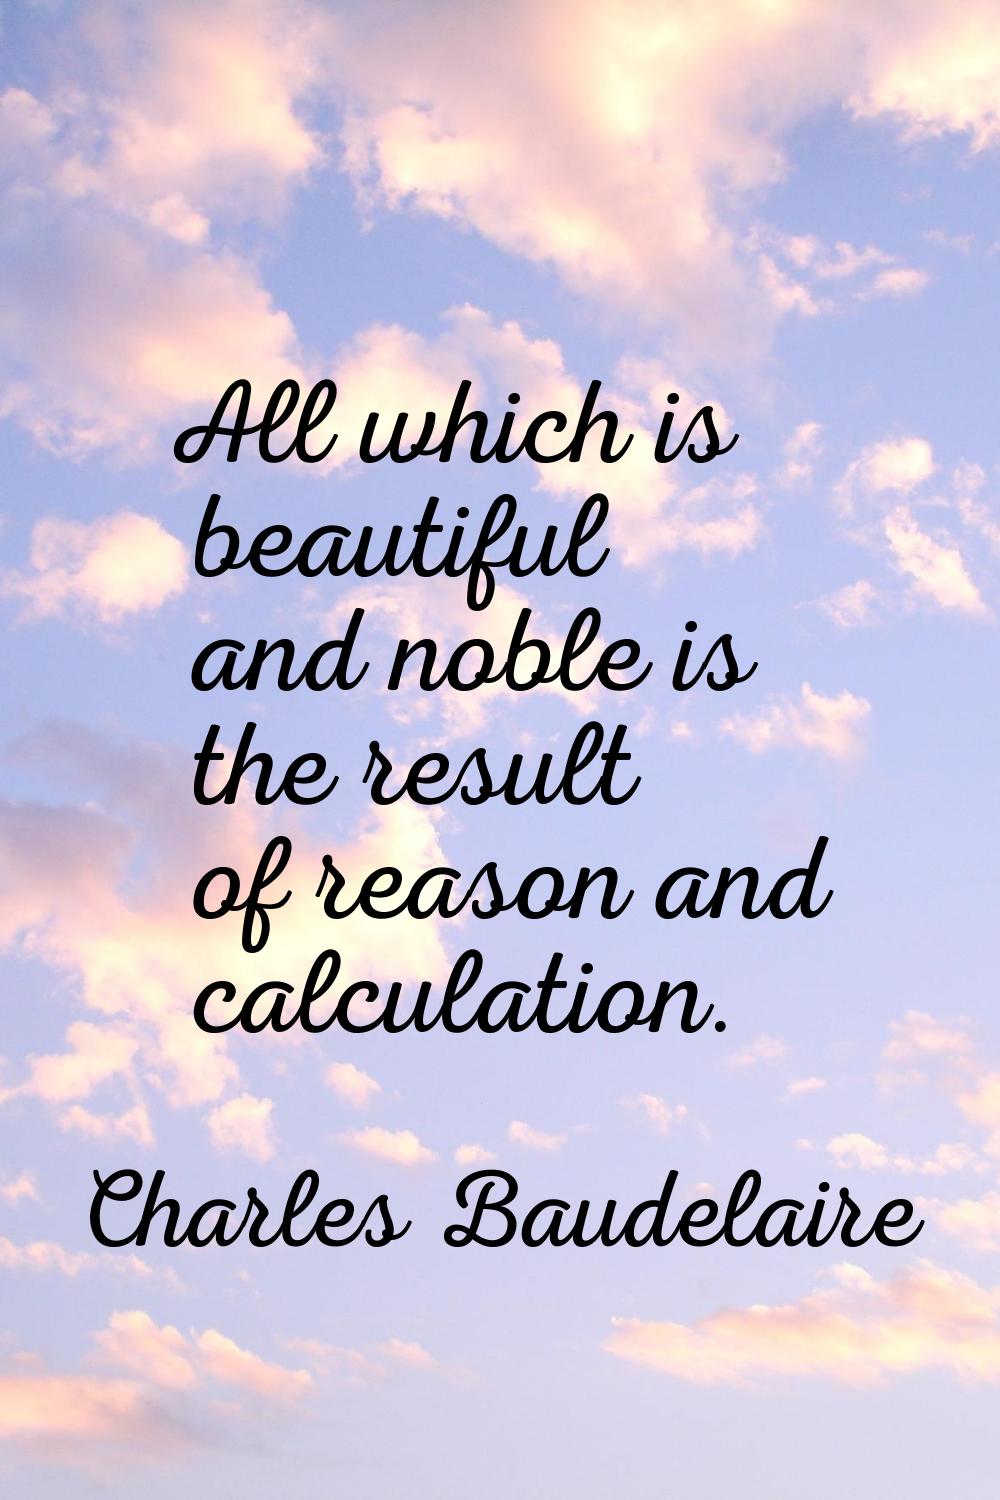 All which is beautiful and noble is the result of reason and calculation.